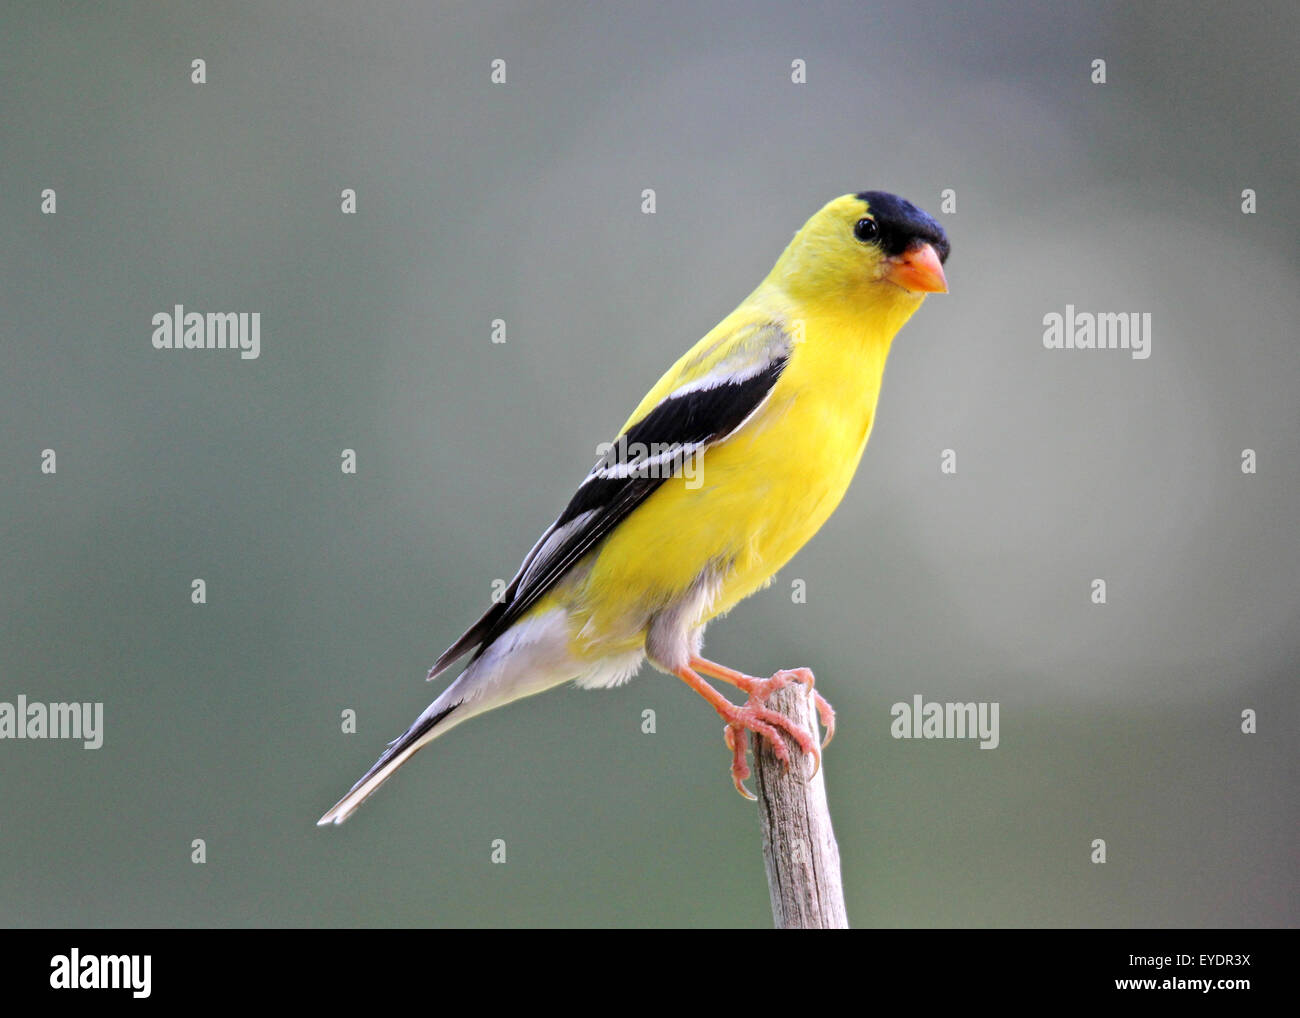 A male American Goldfinch (Carduelis tristis) in bright yellow summer breeding plumage perching on a branch Stock Photo